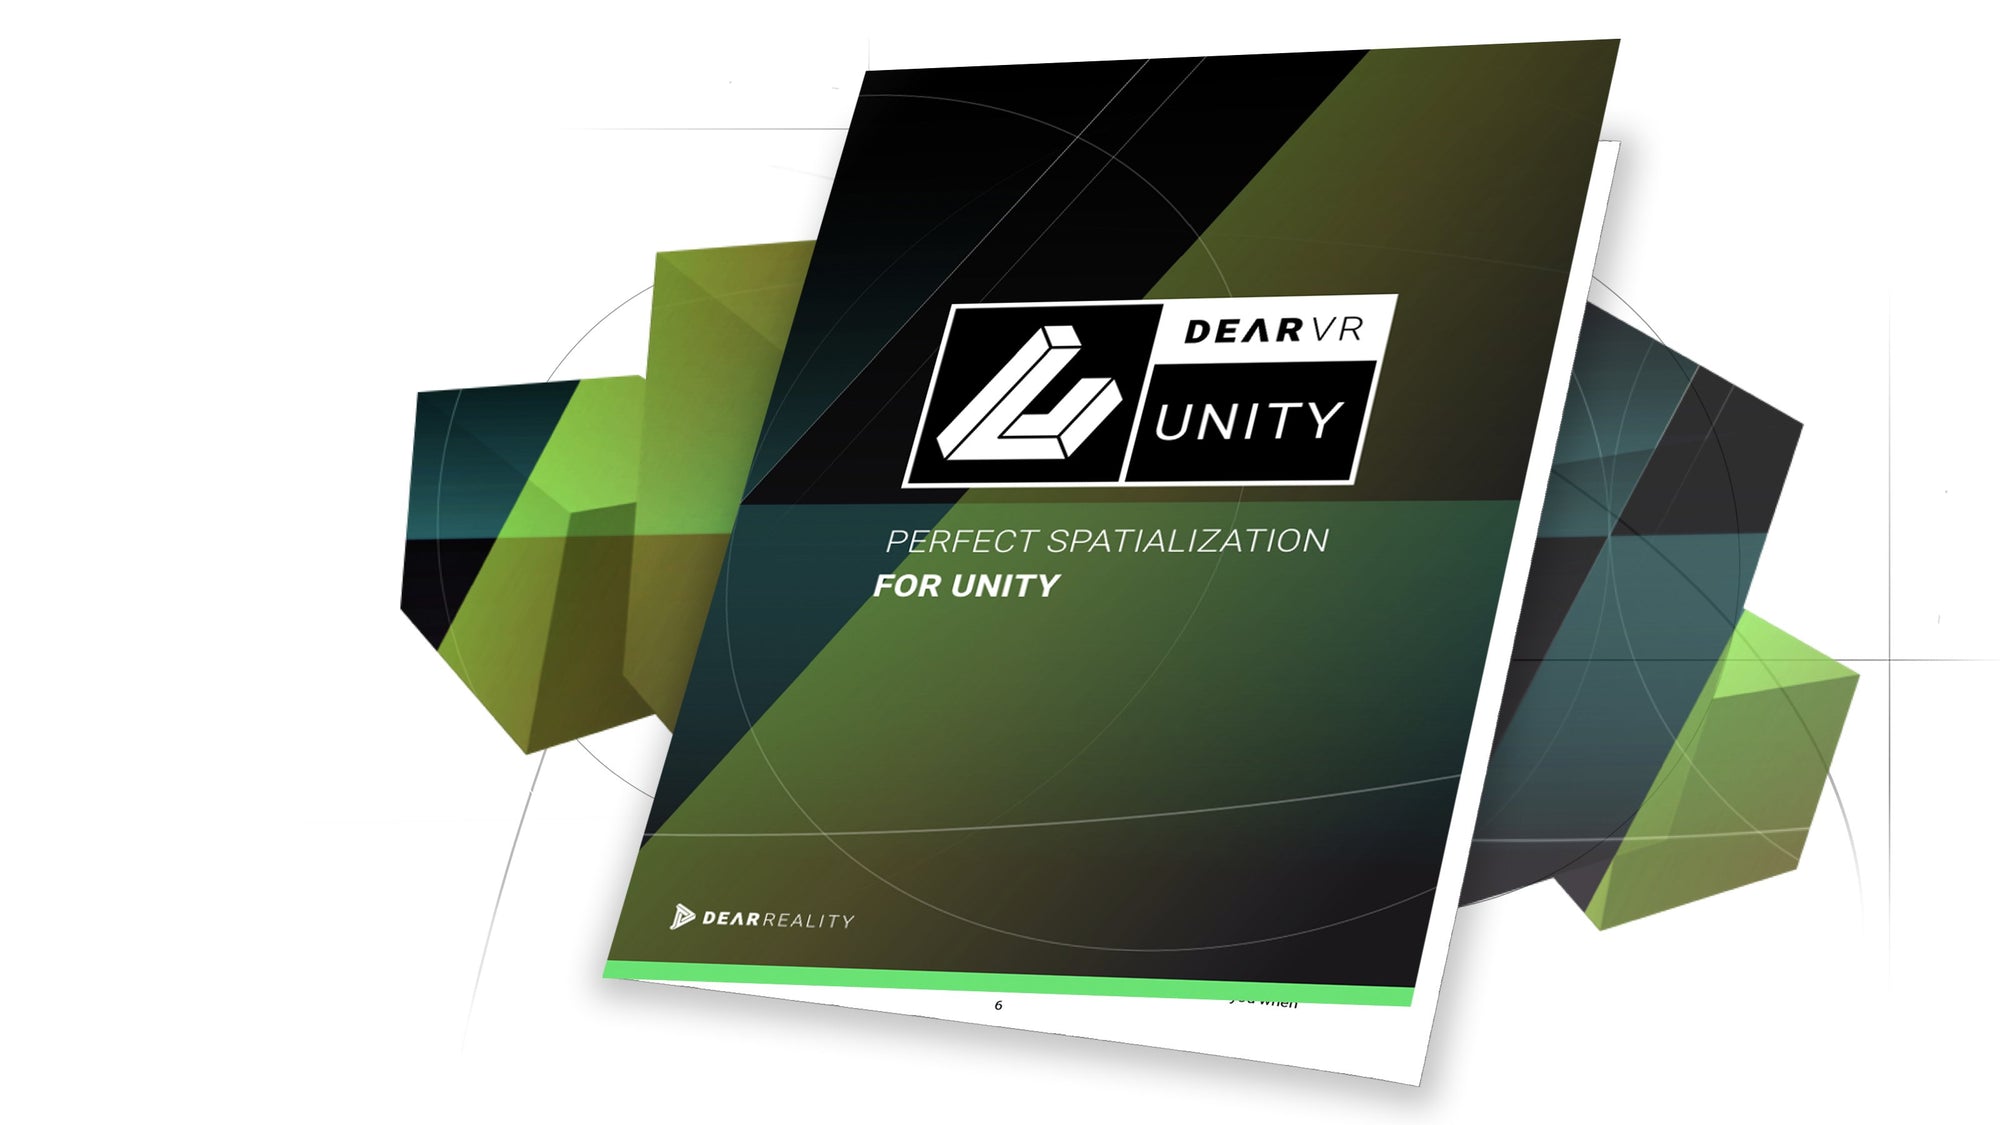 Download the dearVR UNITY manual to get detailed insights